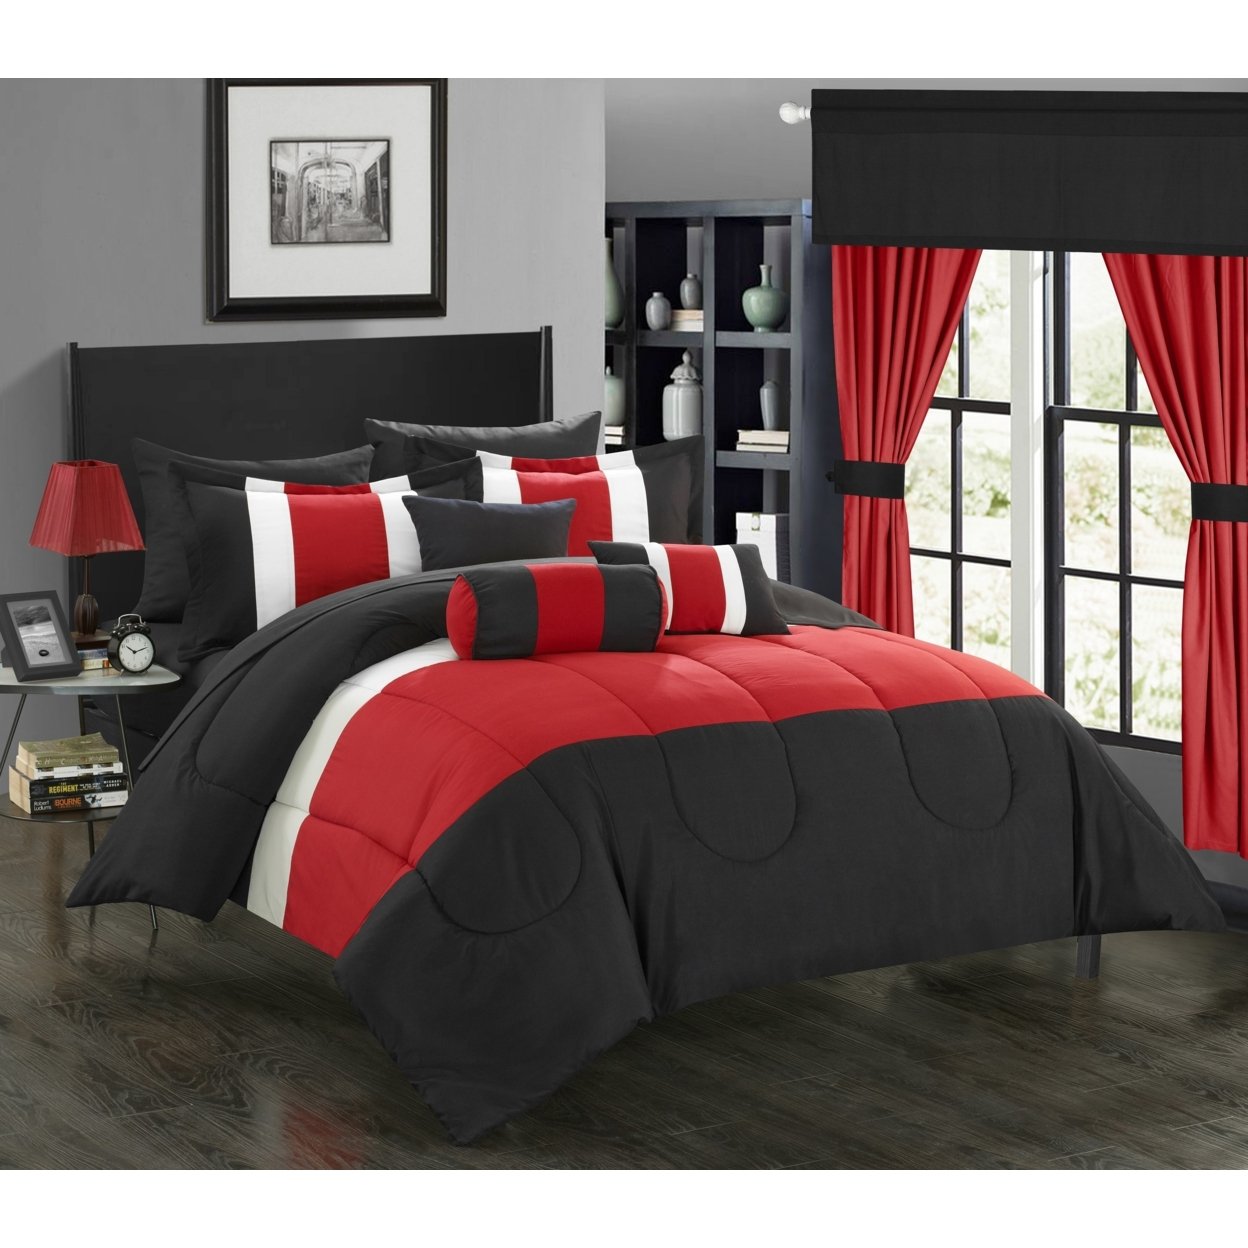 Chic Home 20 Piece Wanstead Complete Pieced Color Block Bedding, Sheets, Window Panel Collection Bed In A Bag Comforter Set - Black, King